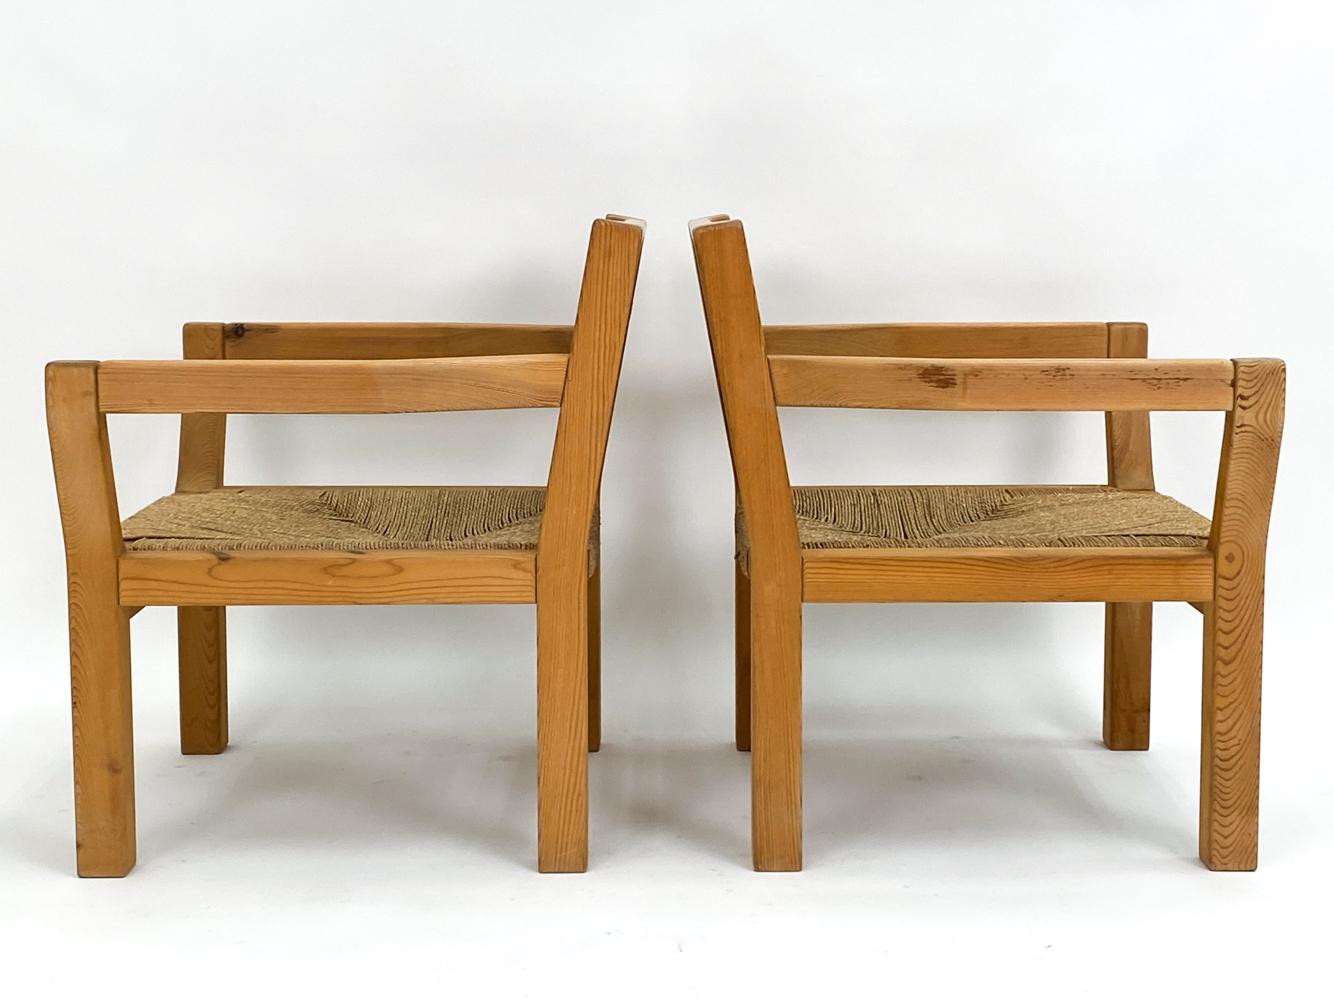 Pair of Tage Poulsen Pine & Rush Seat Lounge Chairs, c. 1970's For Sale 5